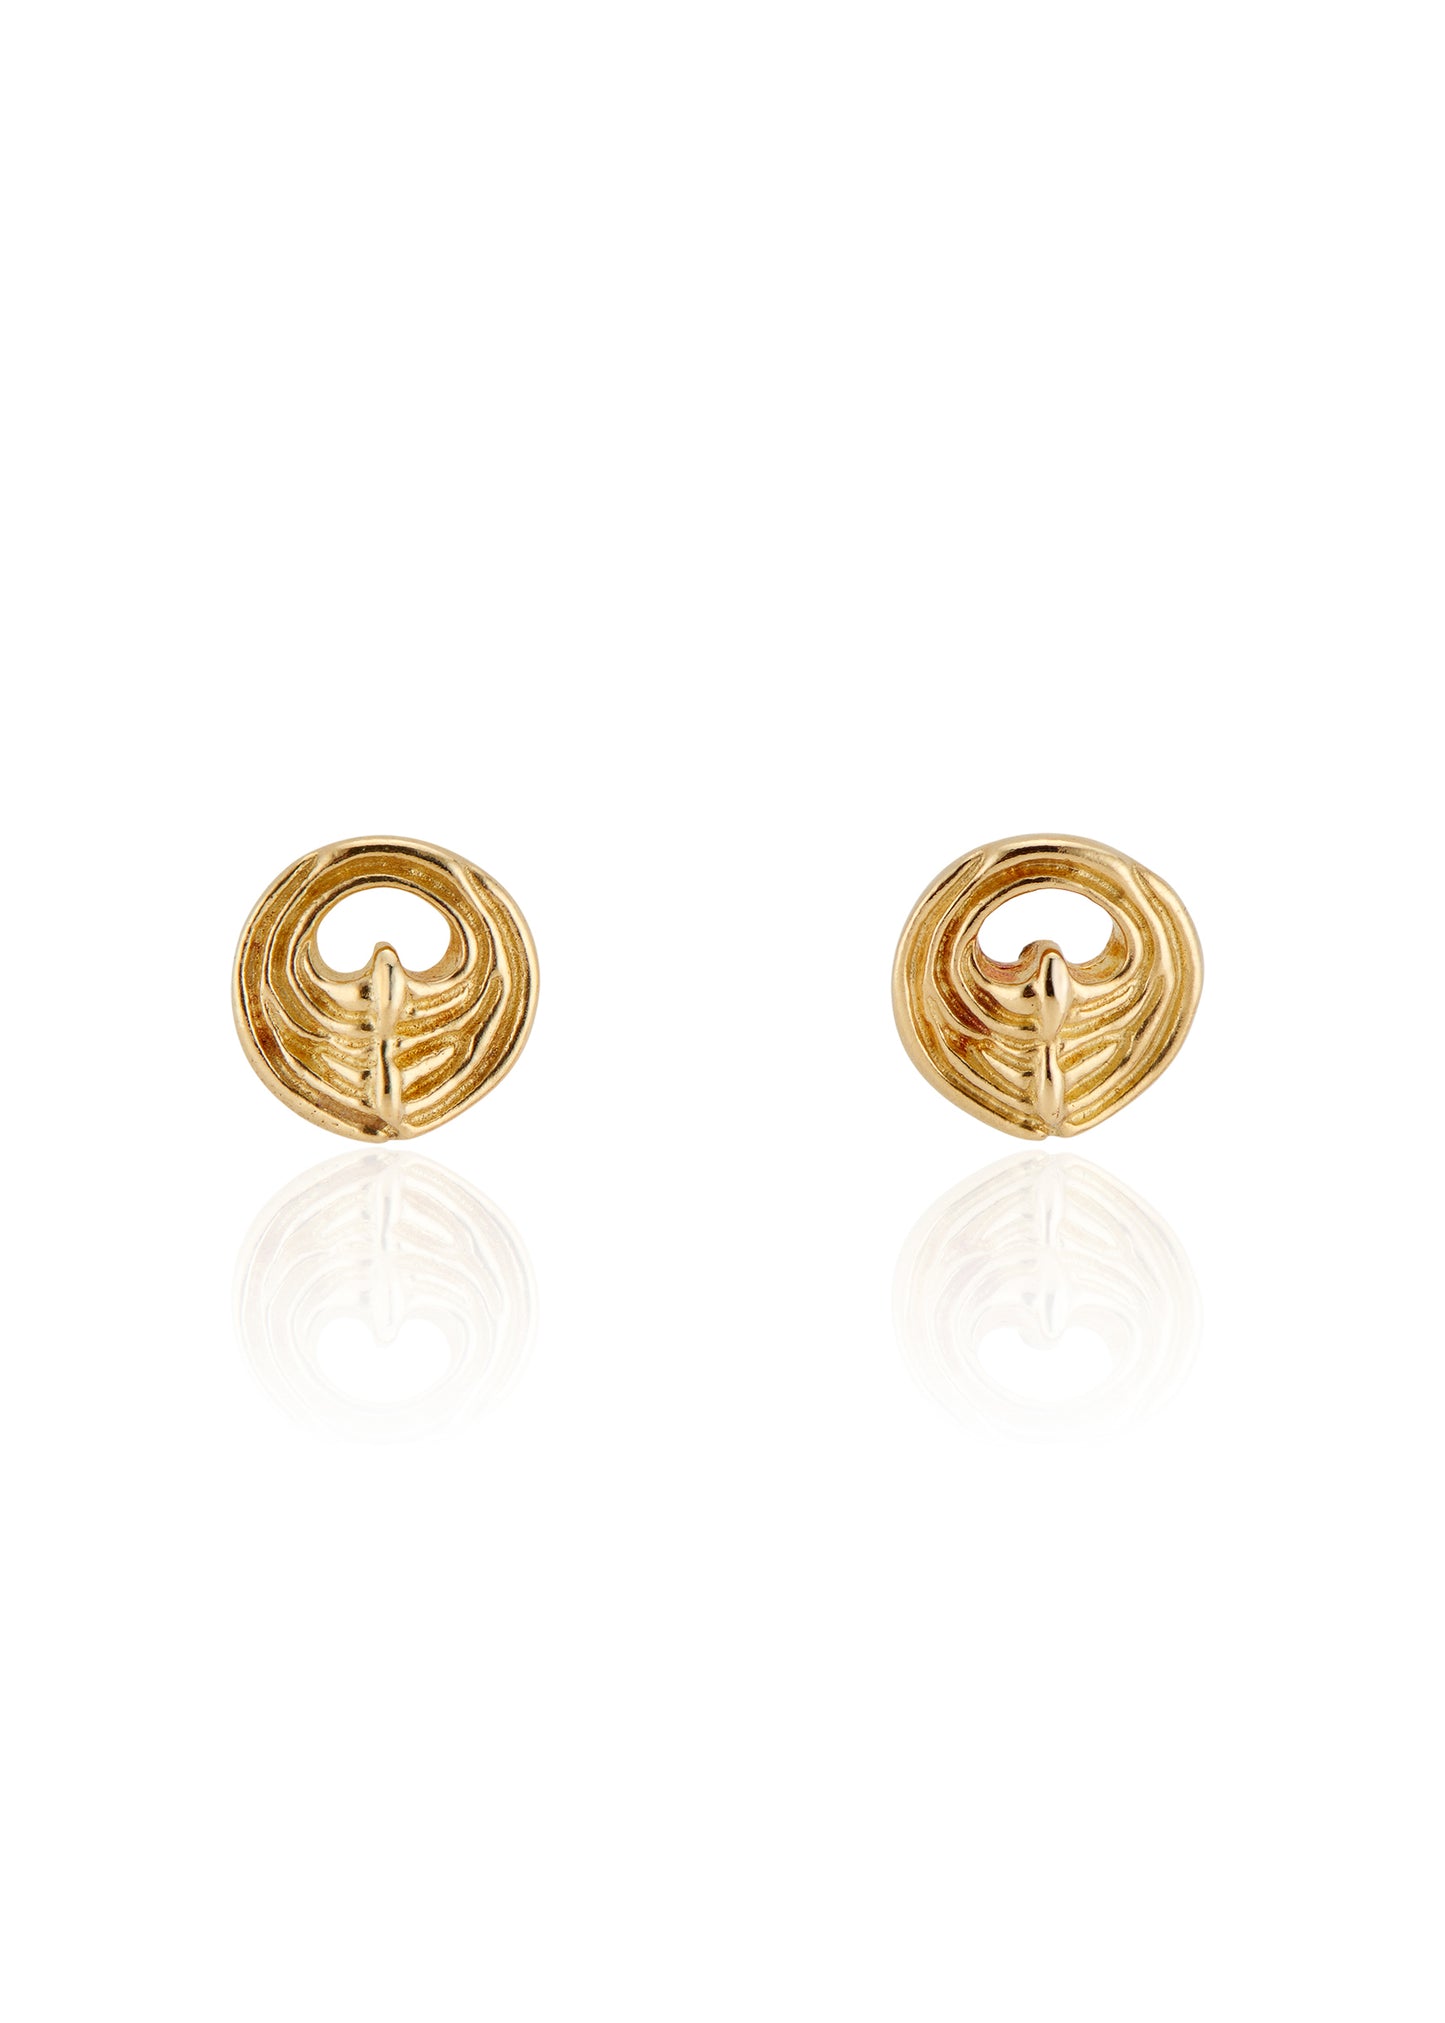 A nod to the impenetrable strength of the feminine spirit, the Shield earring merges strong lines with gentle sloping curves—a hand-crafted study of power and grace, of substance and elegance. 